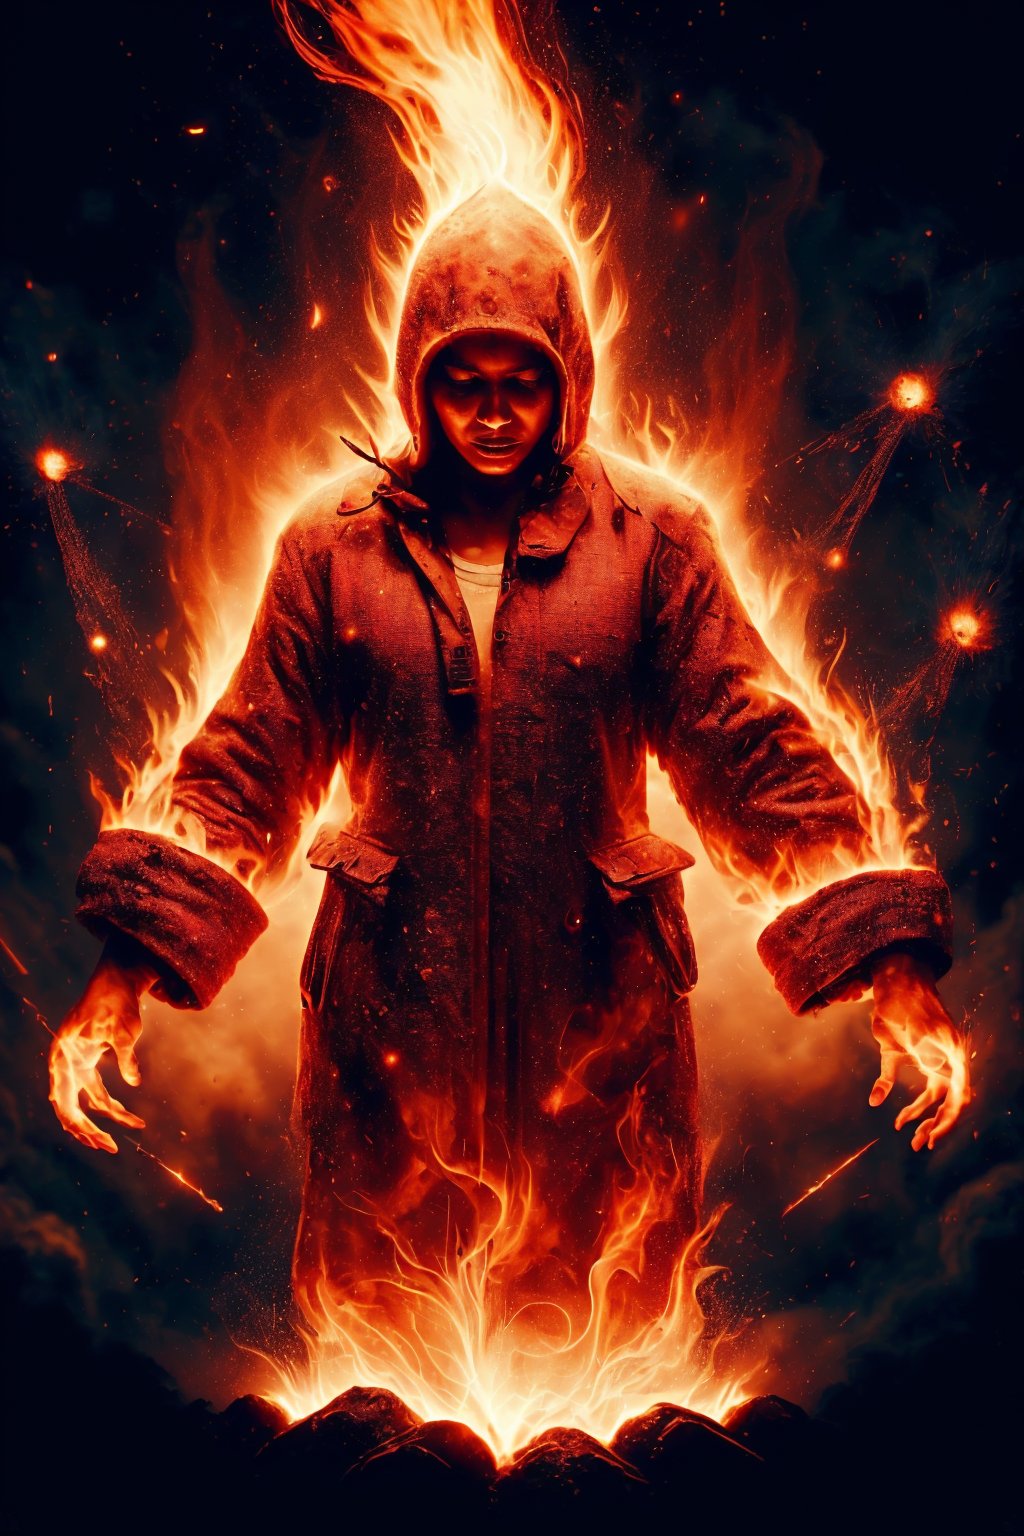 Full body on flame, lava skin, magic thunder,,glowing forehead, big navel, 30year old women body, ,fireastrologystylecontrol over fire in a mesmerizing display of power, depicted through a digital illustration inspired by the dynamic energy of Alex Andreev's artwork.